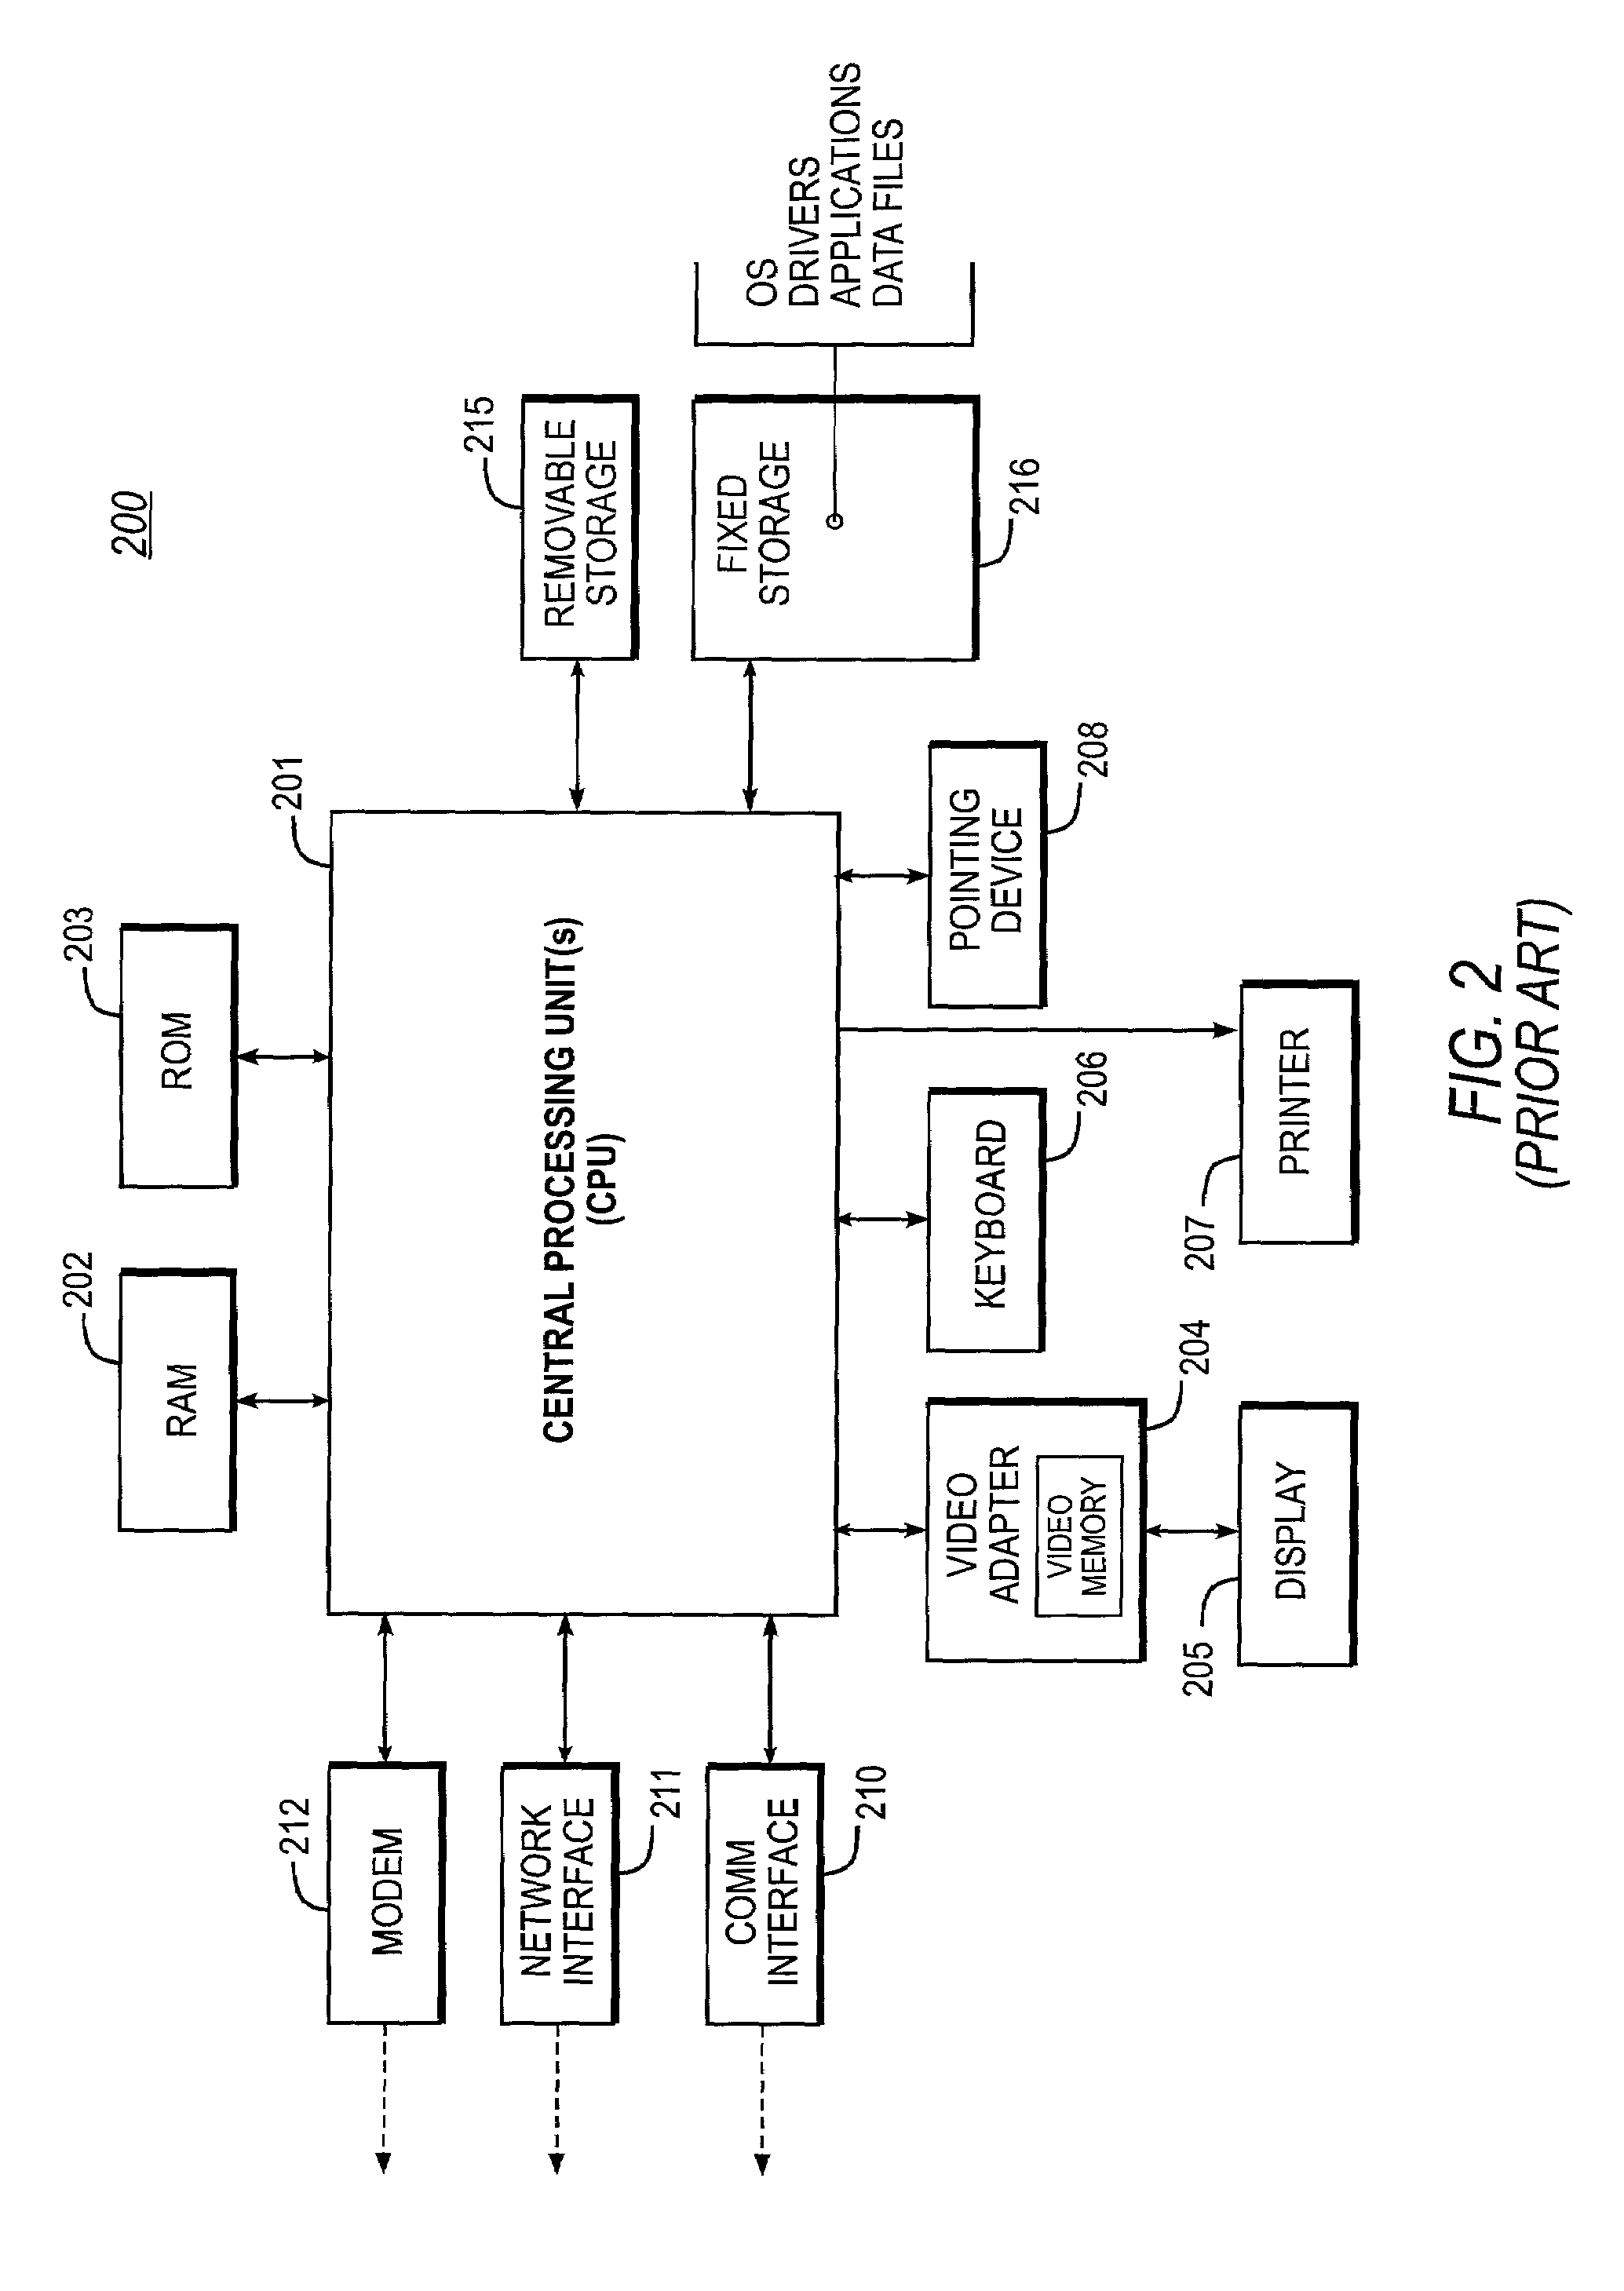 Electronic mail system with methodology providing distributed message store